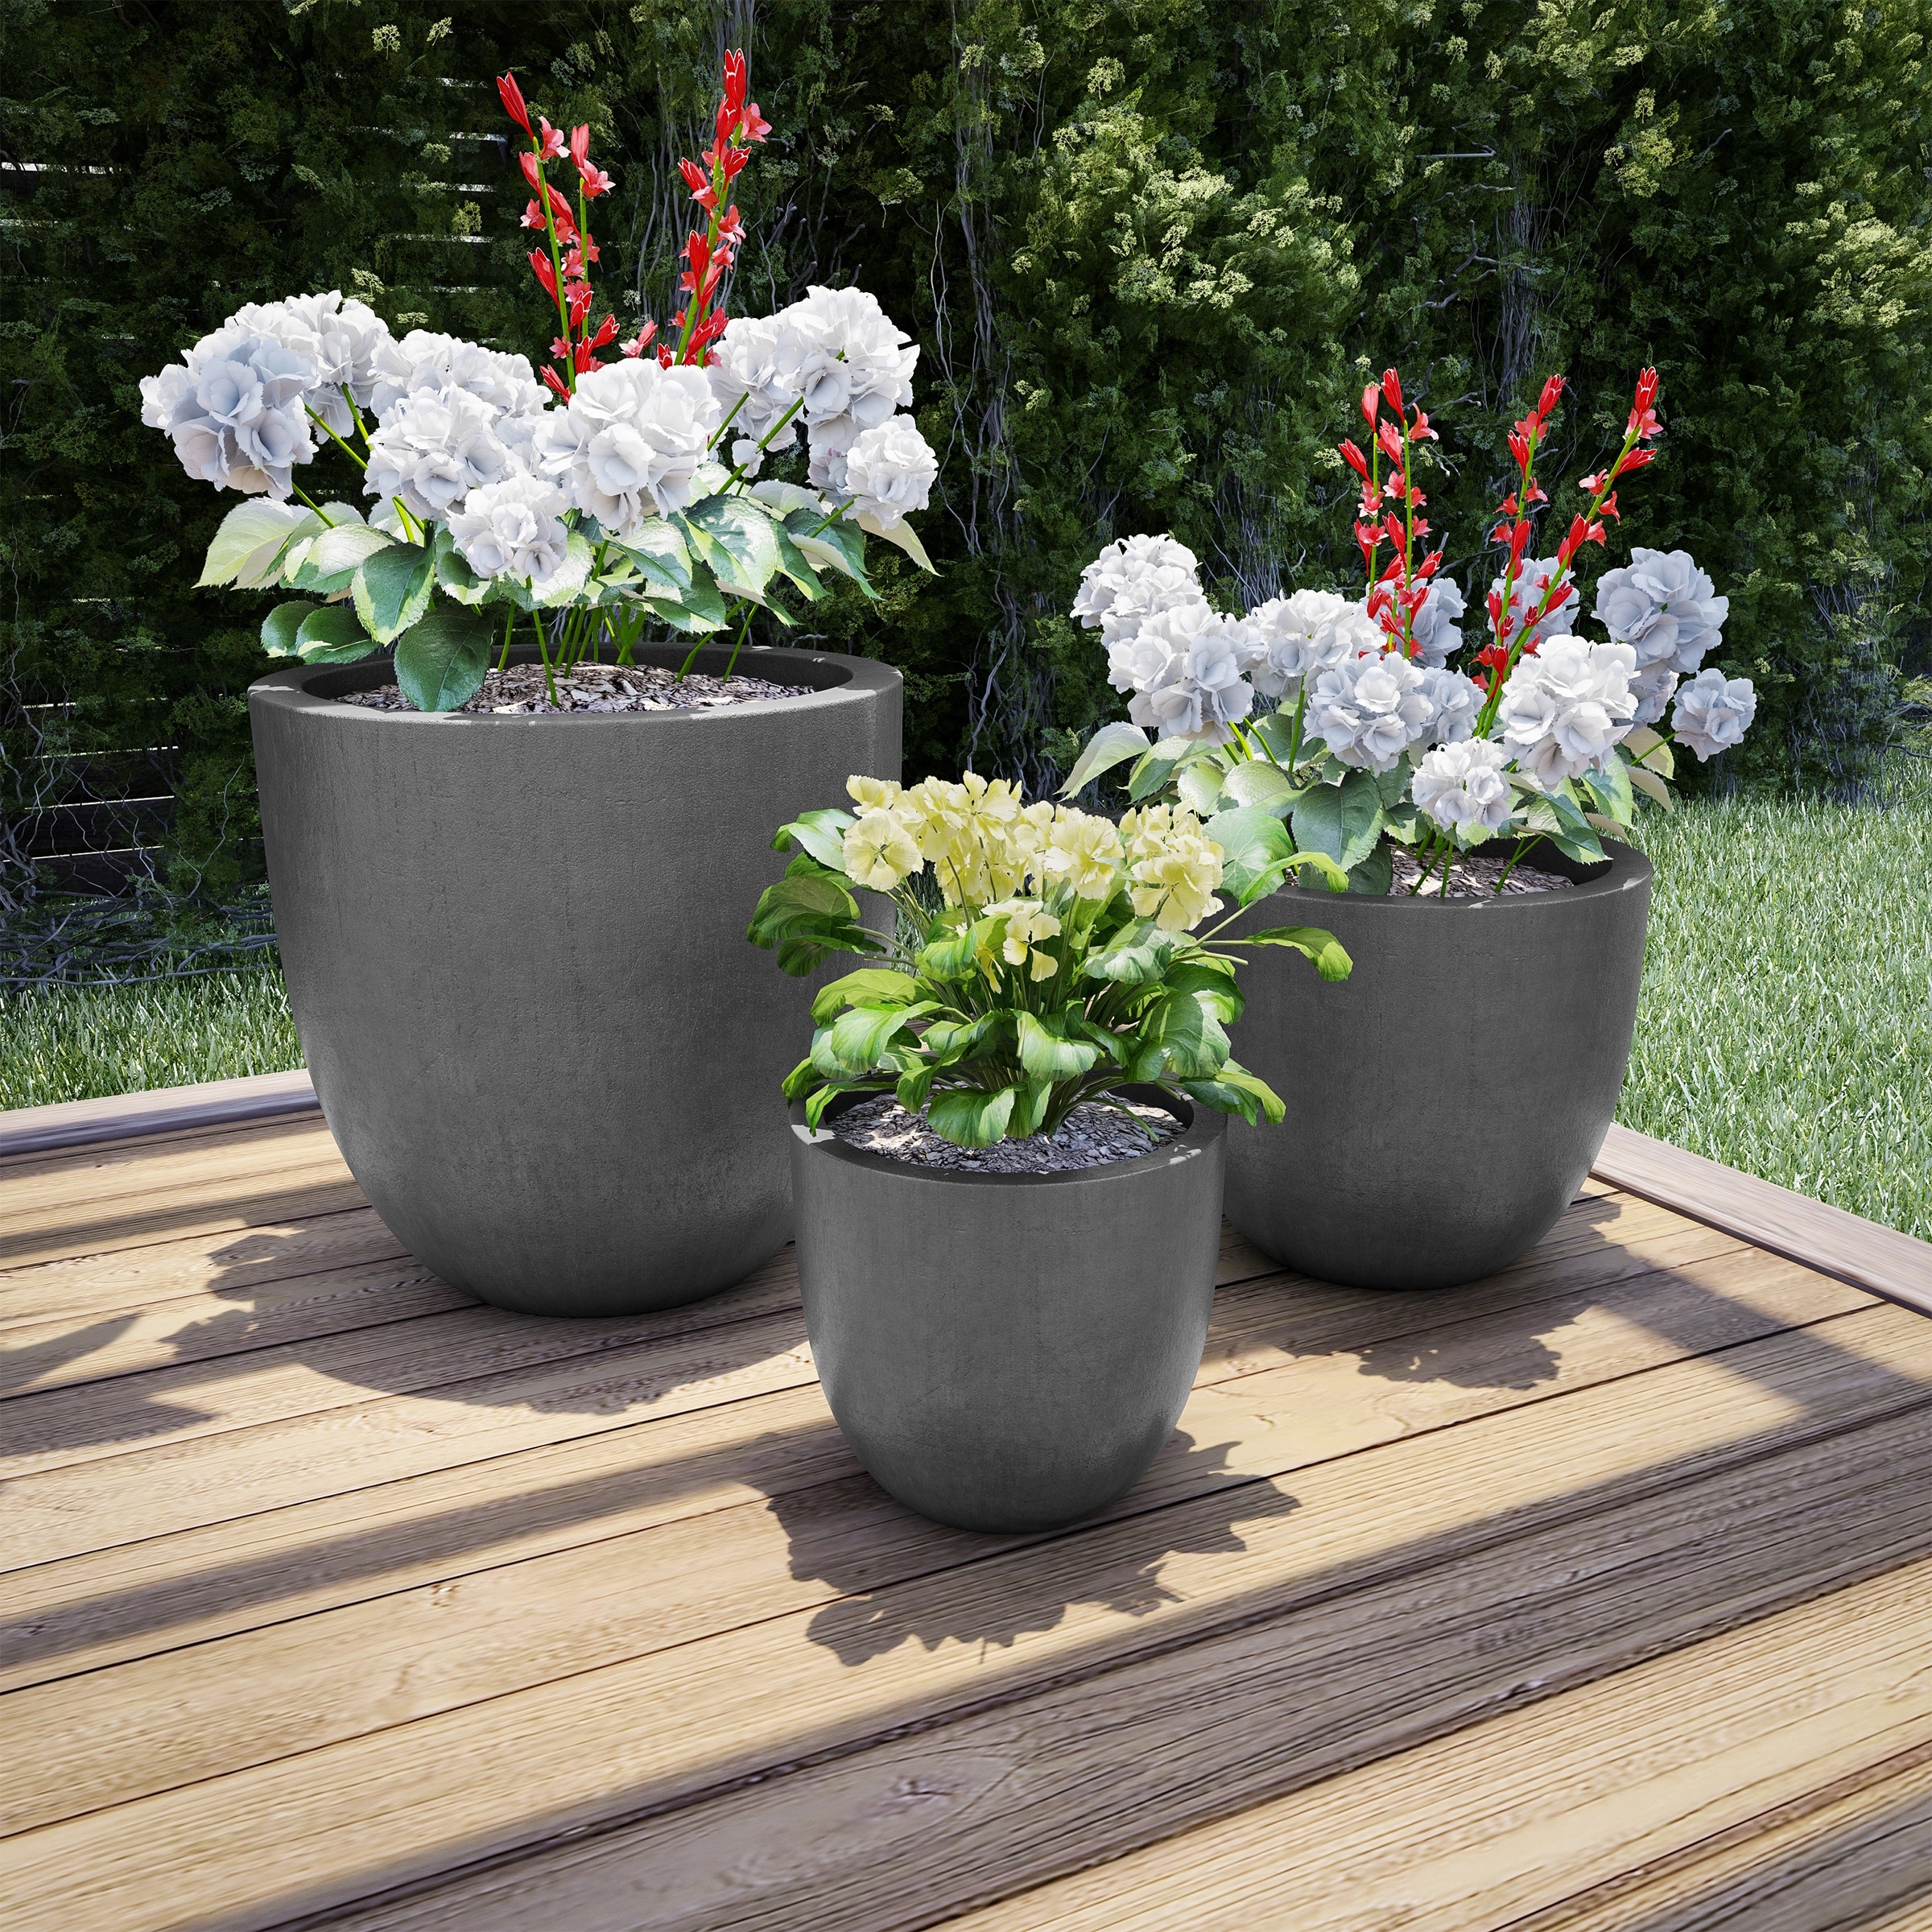 https://ak1.ostkcdn.com/images/products/is/images/direct/12478c9d9b5831a99ca82414df044033b36d8f74/Set-of-3-Fiber-Clay-Planters--Round-Outdoor-Potting-and-Replanting-Pots-Weather-Resistant-with-Drainage-Holes-by-Pure-Garden.jpg